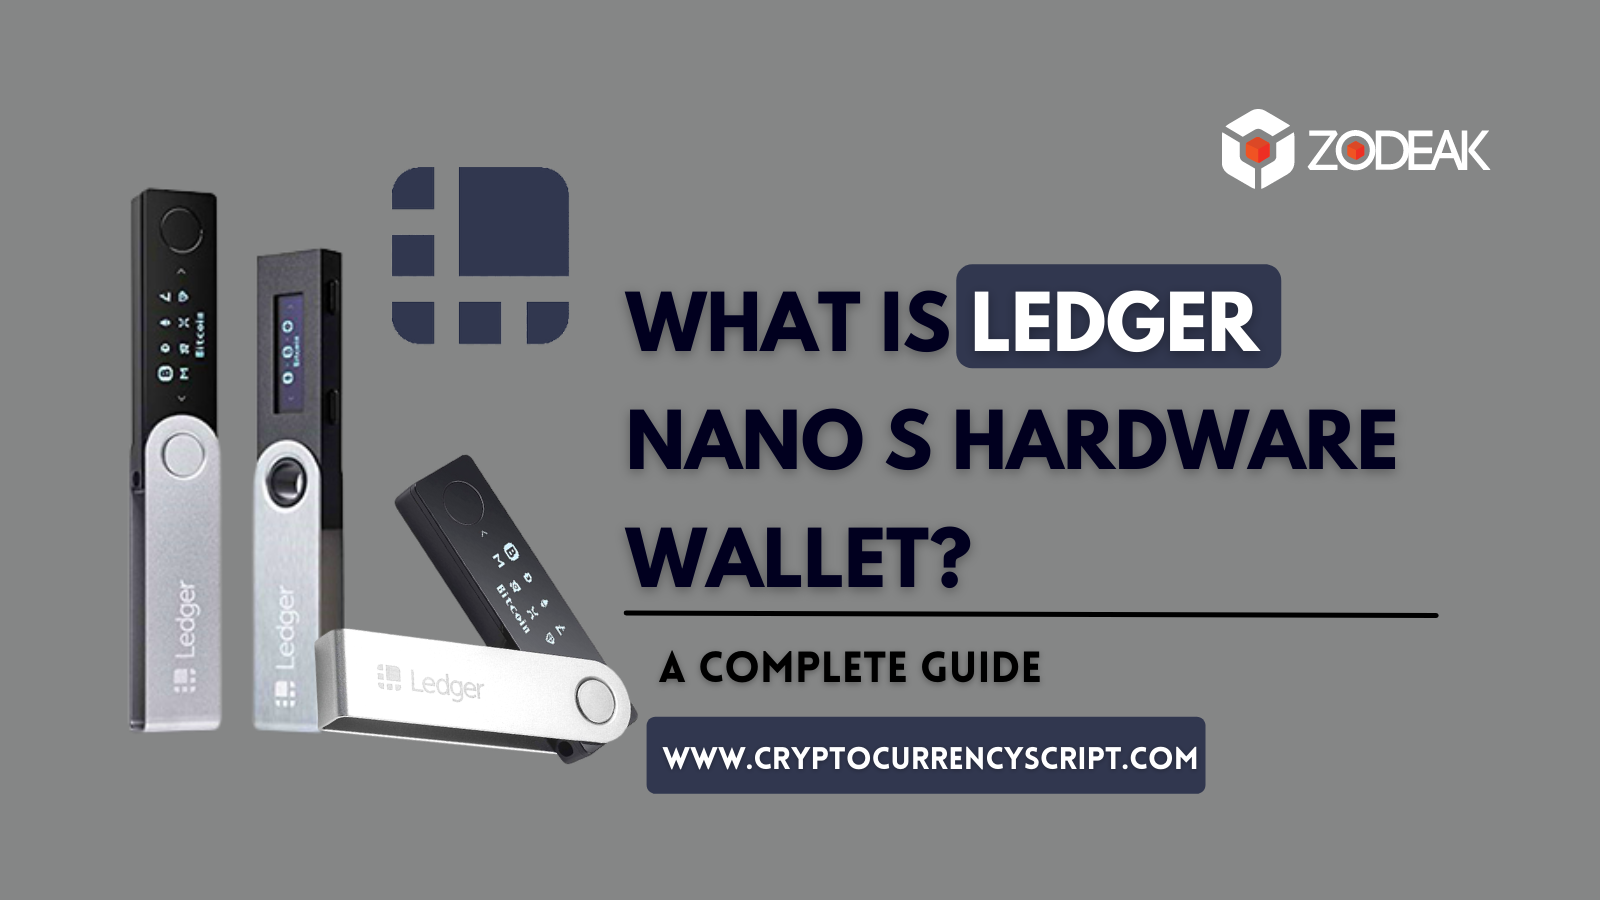 What Is Ledger Nano S Wallet? – A Complete Guide